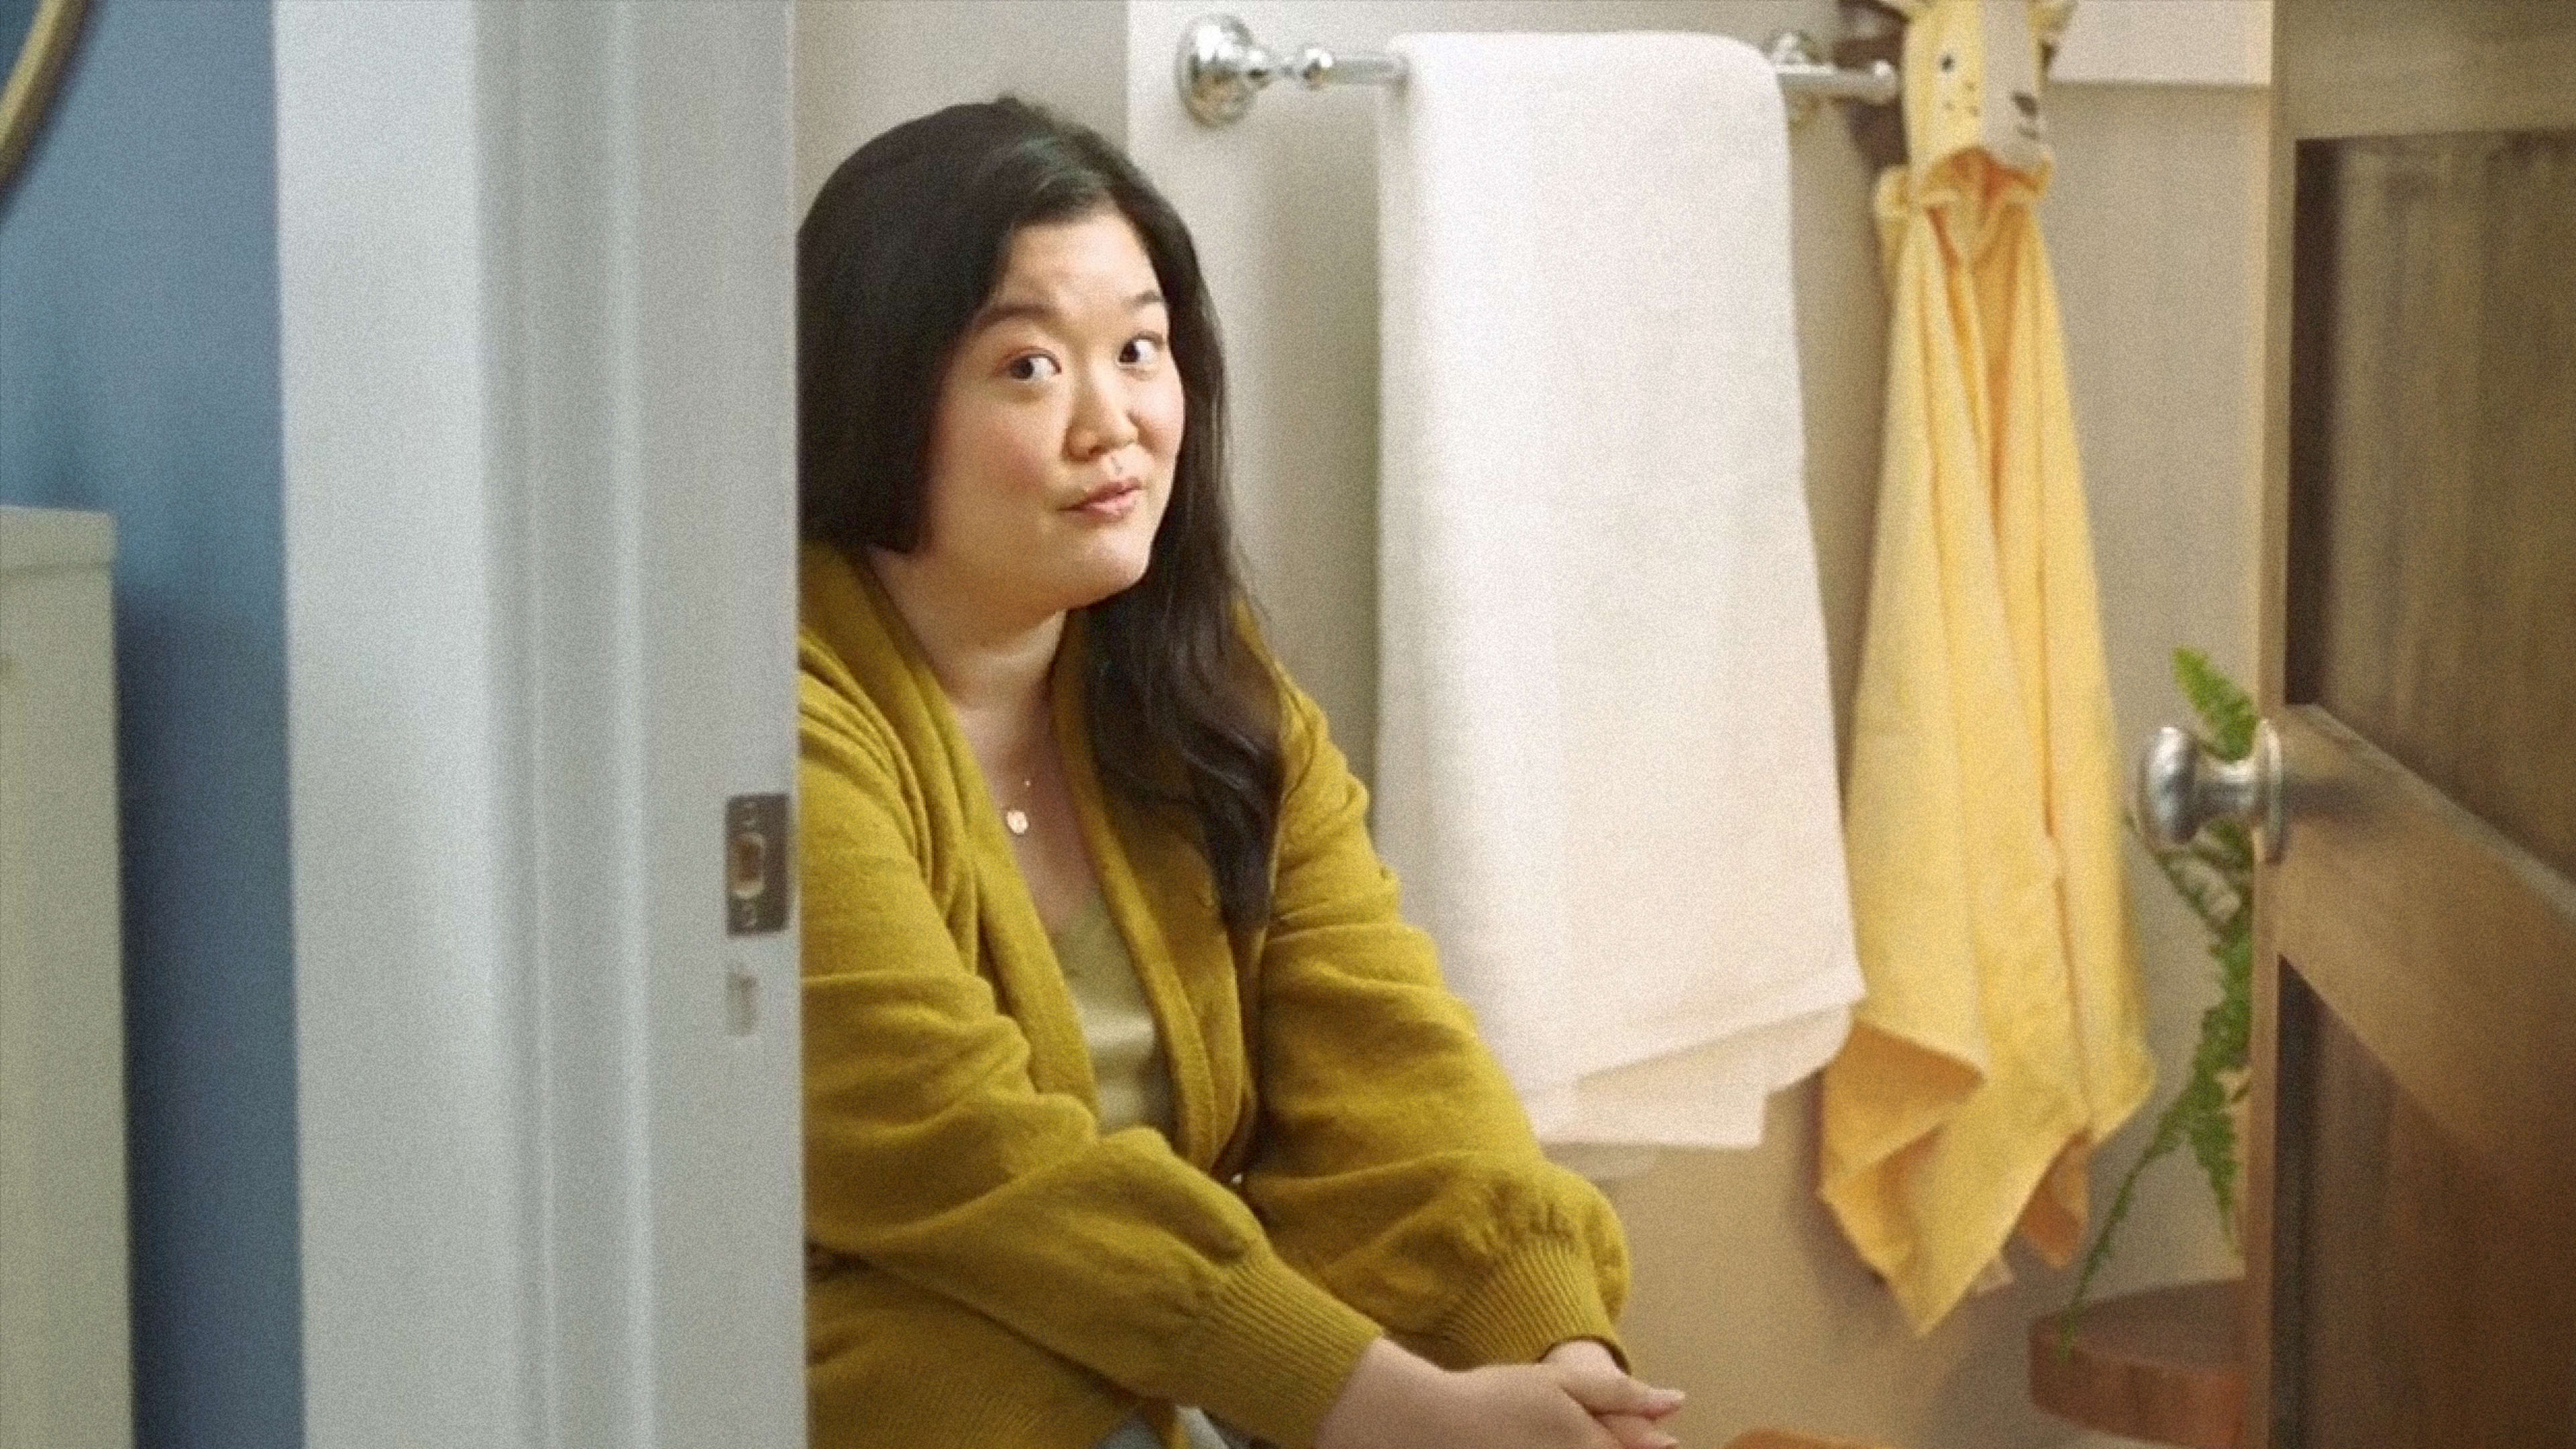 This commercial is here to remind you that women do actually poop